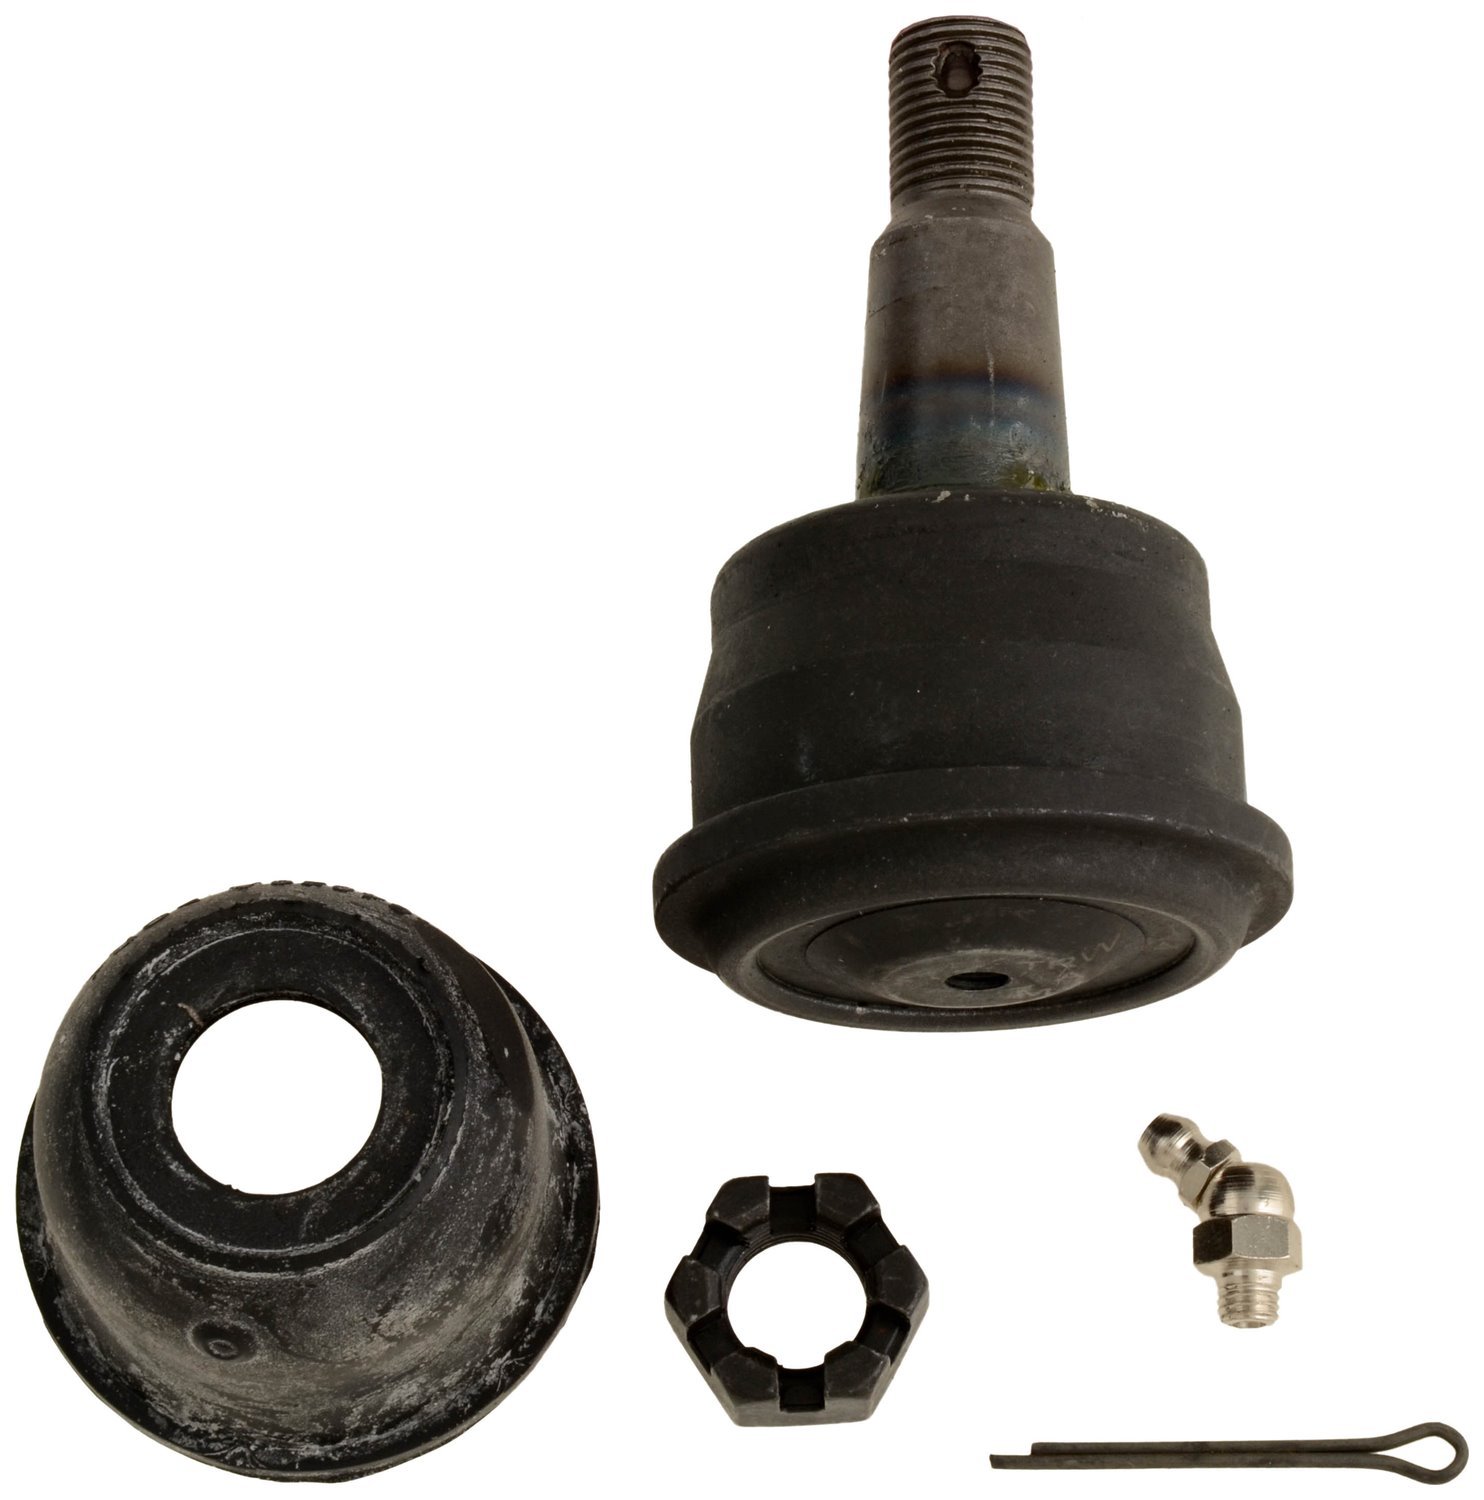 JBJ897 Ball Joint Fits Select GM Models, Position: Left/Driver or Right/Passenger, Front Lower